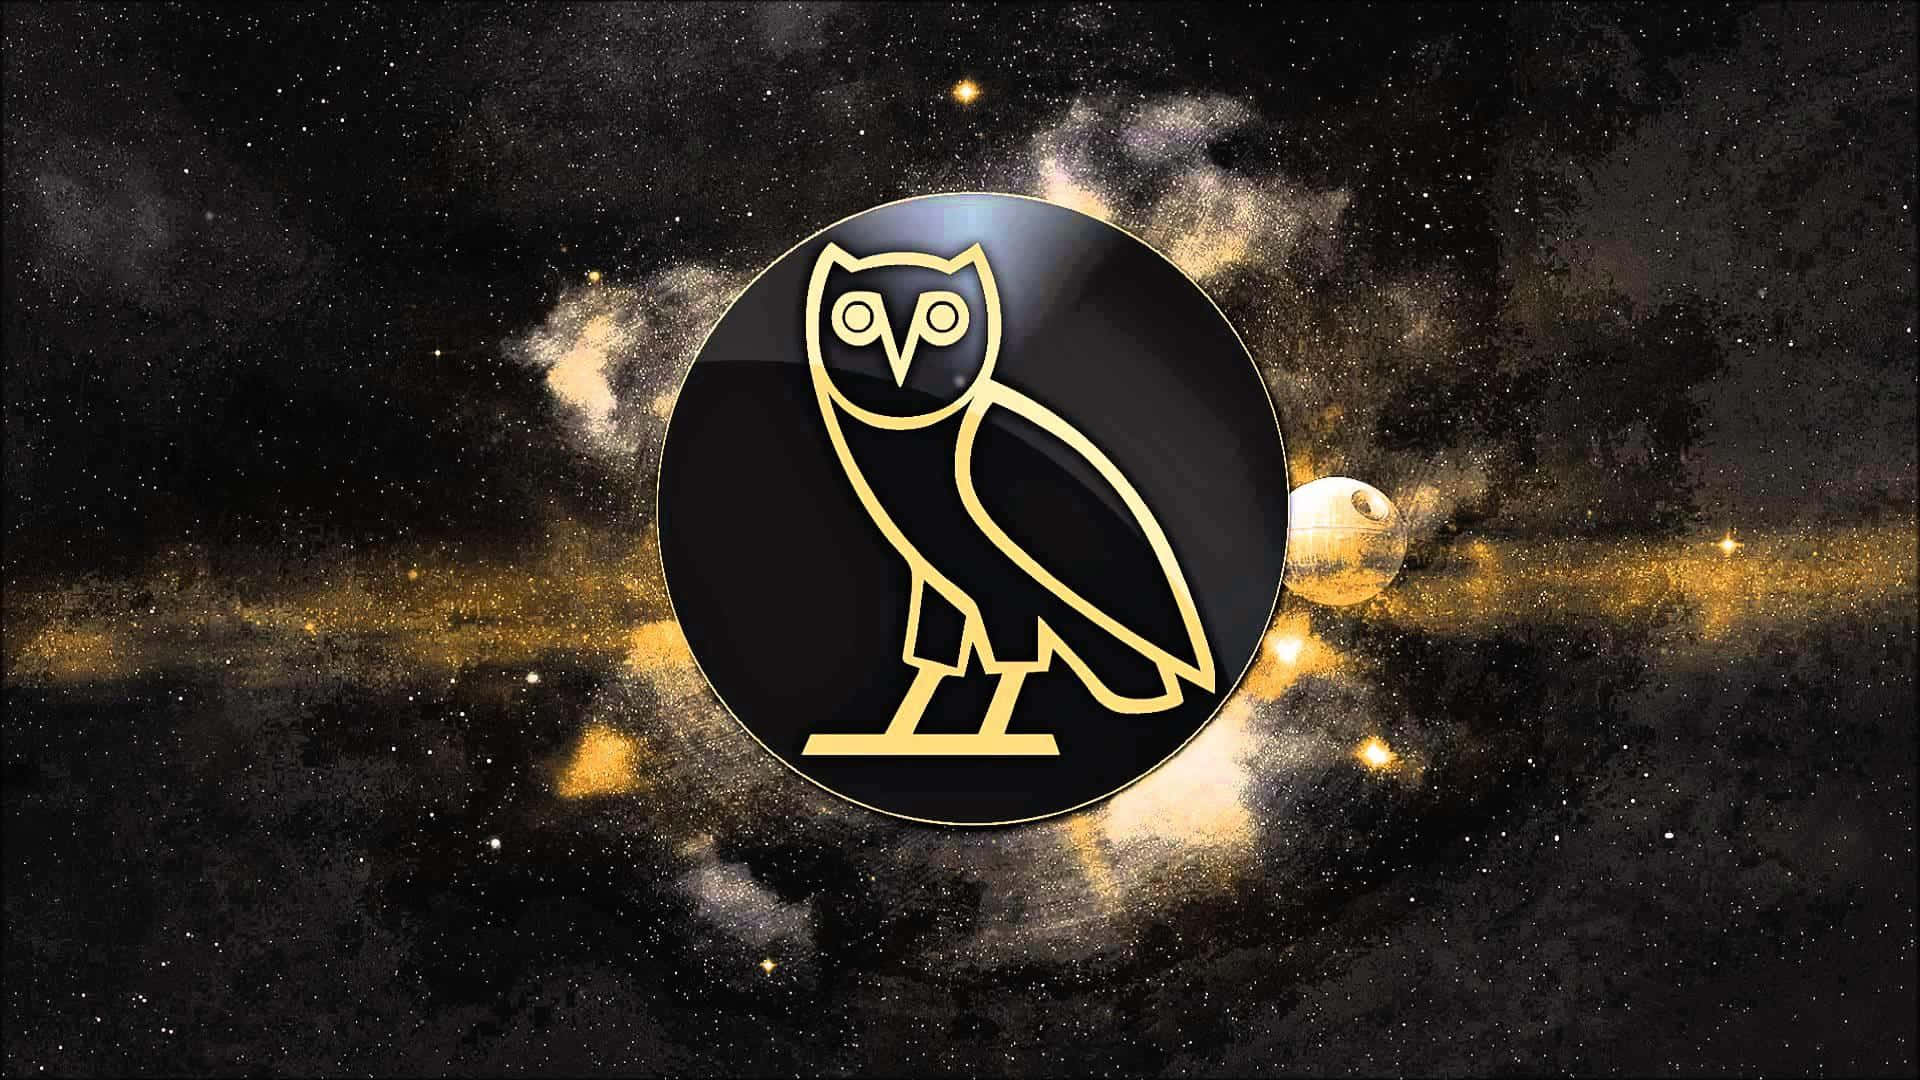 "Express your life with Ovoxo!" Wallpaper